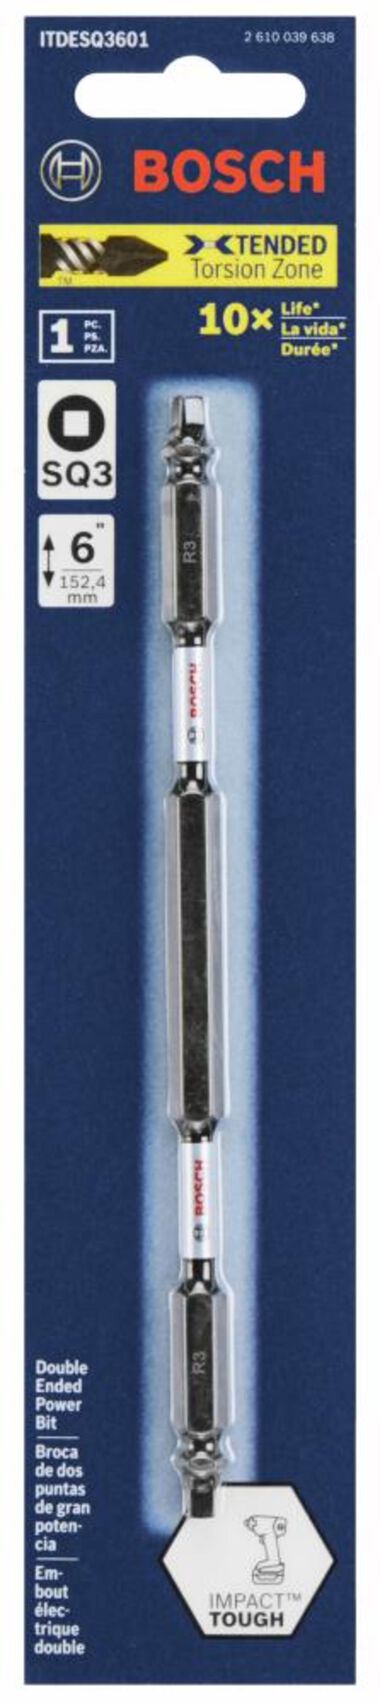 Bosch Impact Tough 6 In Square #3 Double-Ended Bit, large image number 2